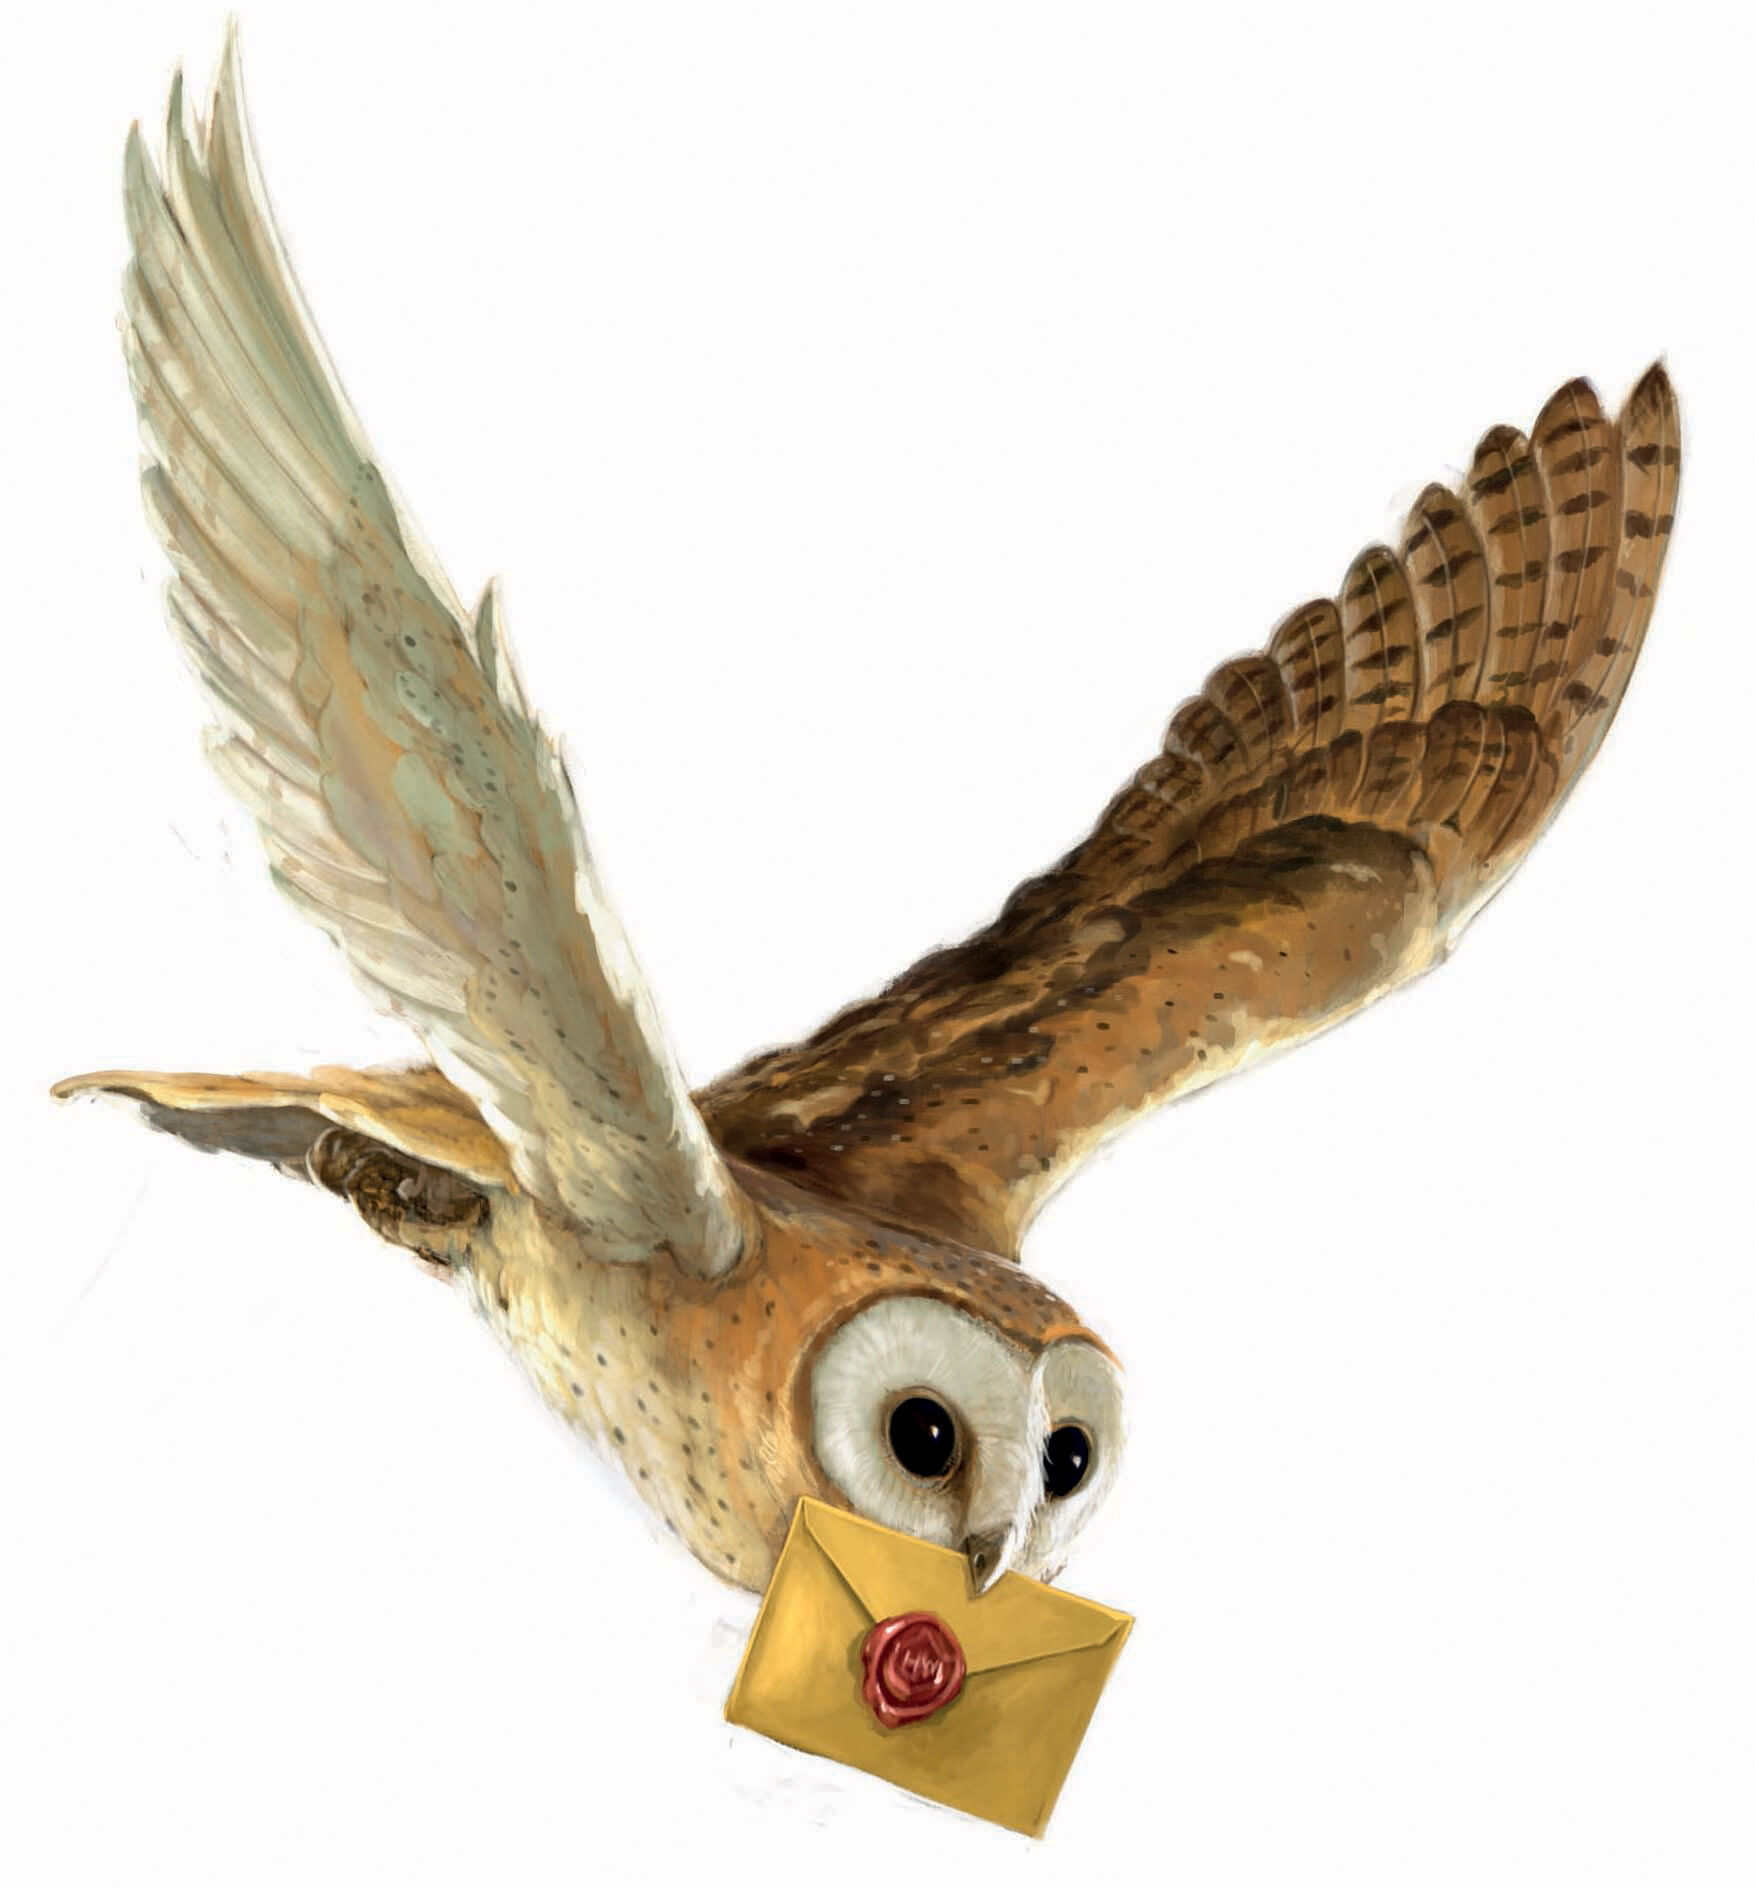 Owls, Pottermore Wiki